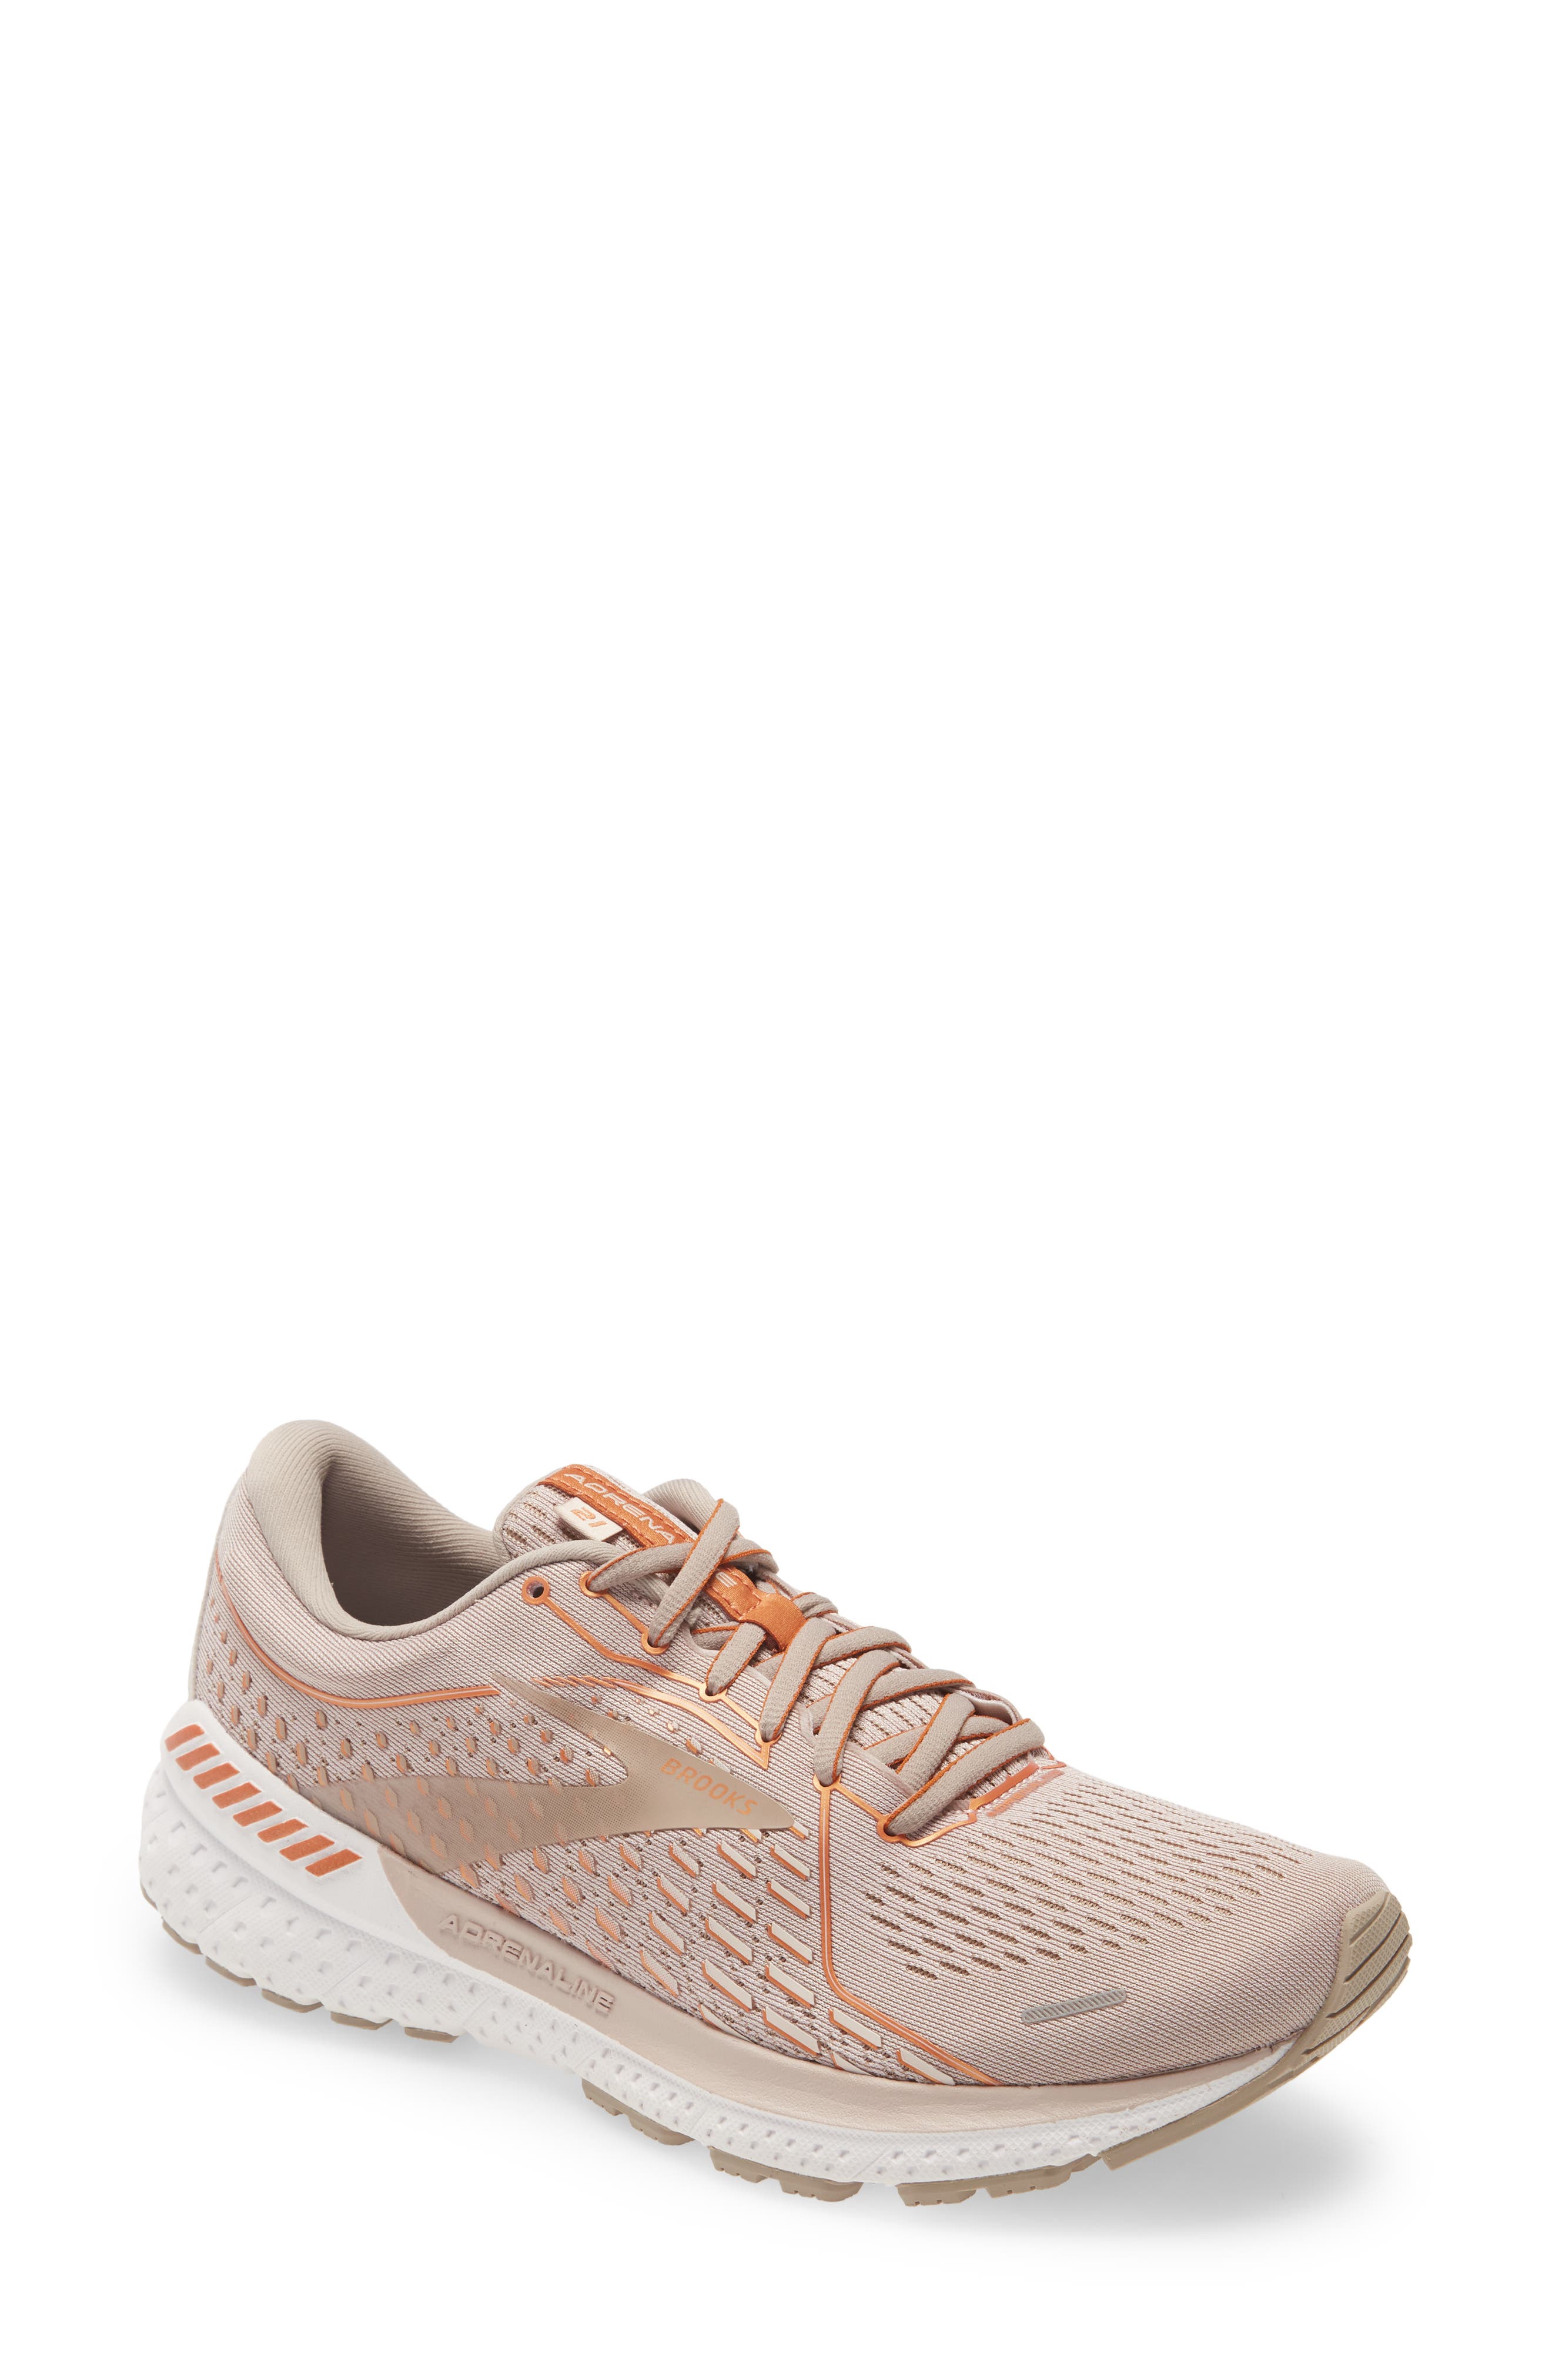 Women's Pink Workout Shoes | Nordstrom